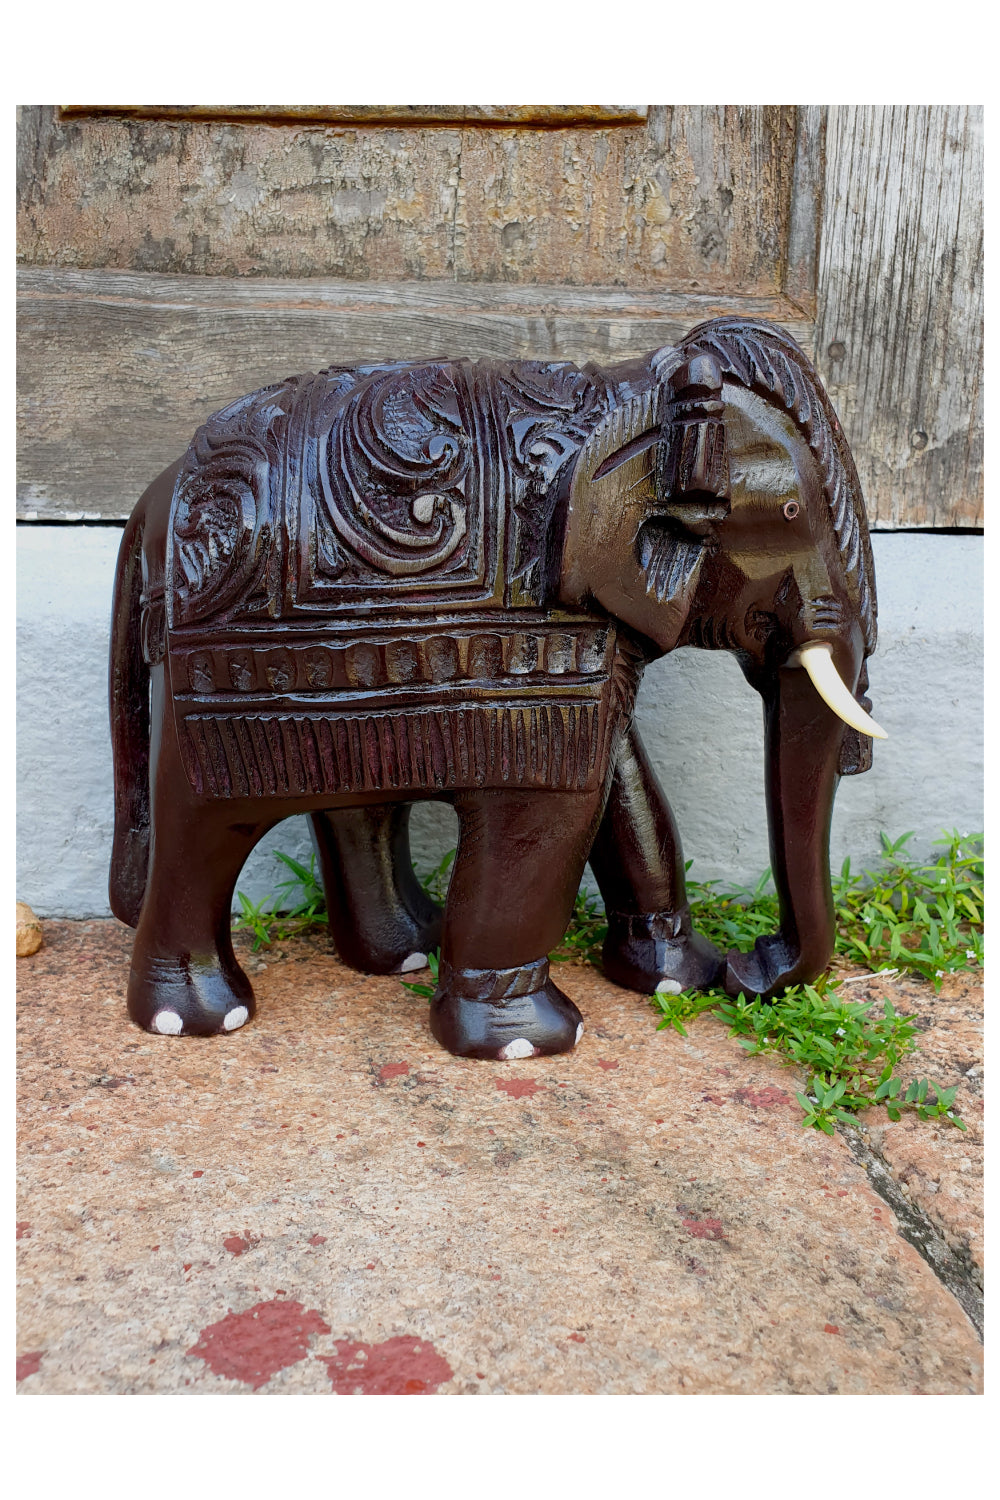 Southloom Handmade Elephant with Carved Patterns Handicraft (Carved from Rose Wood)